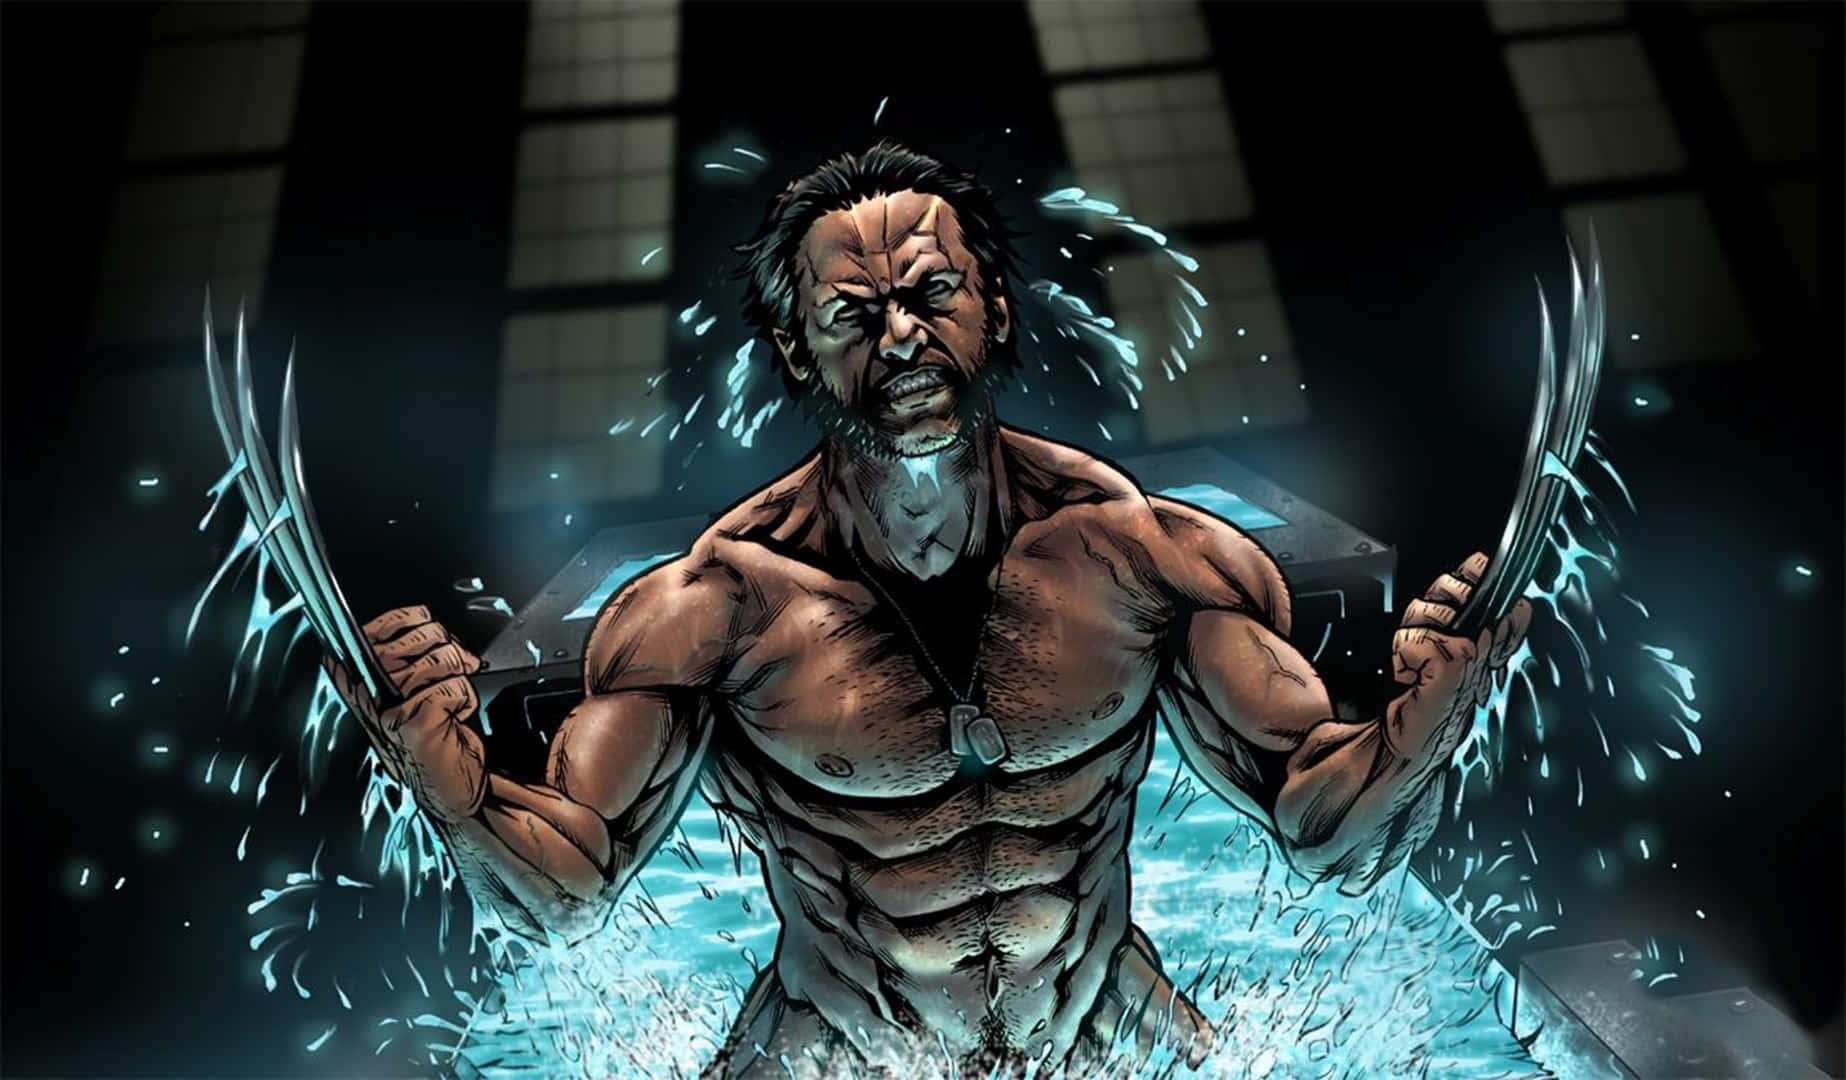 Wolverine, The Powerful Mutant With Superhuman Strength